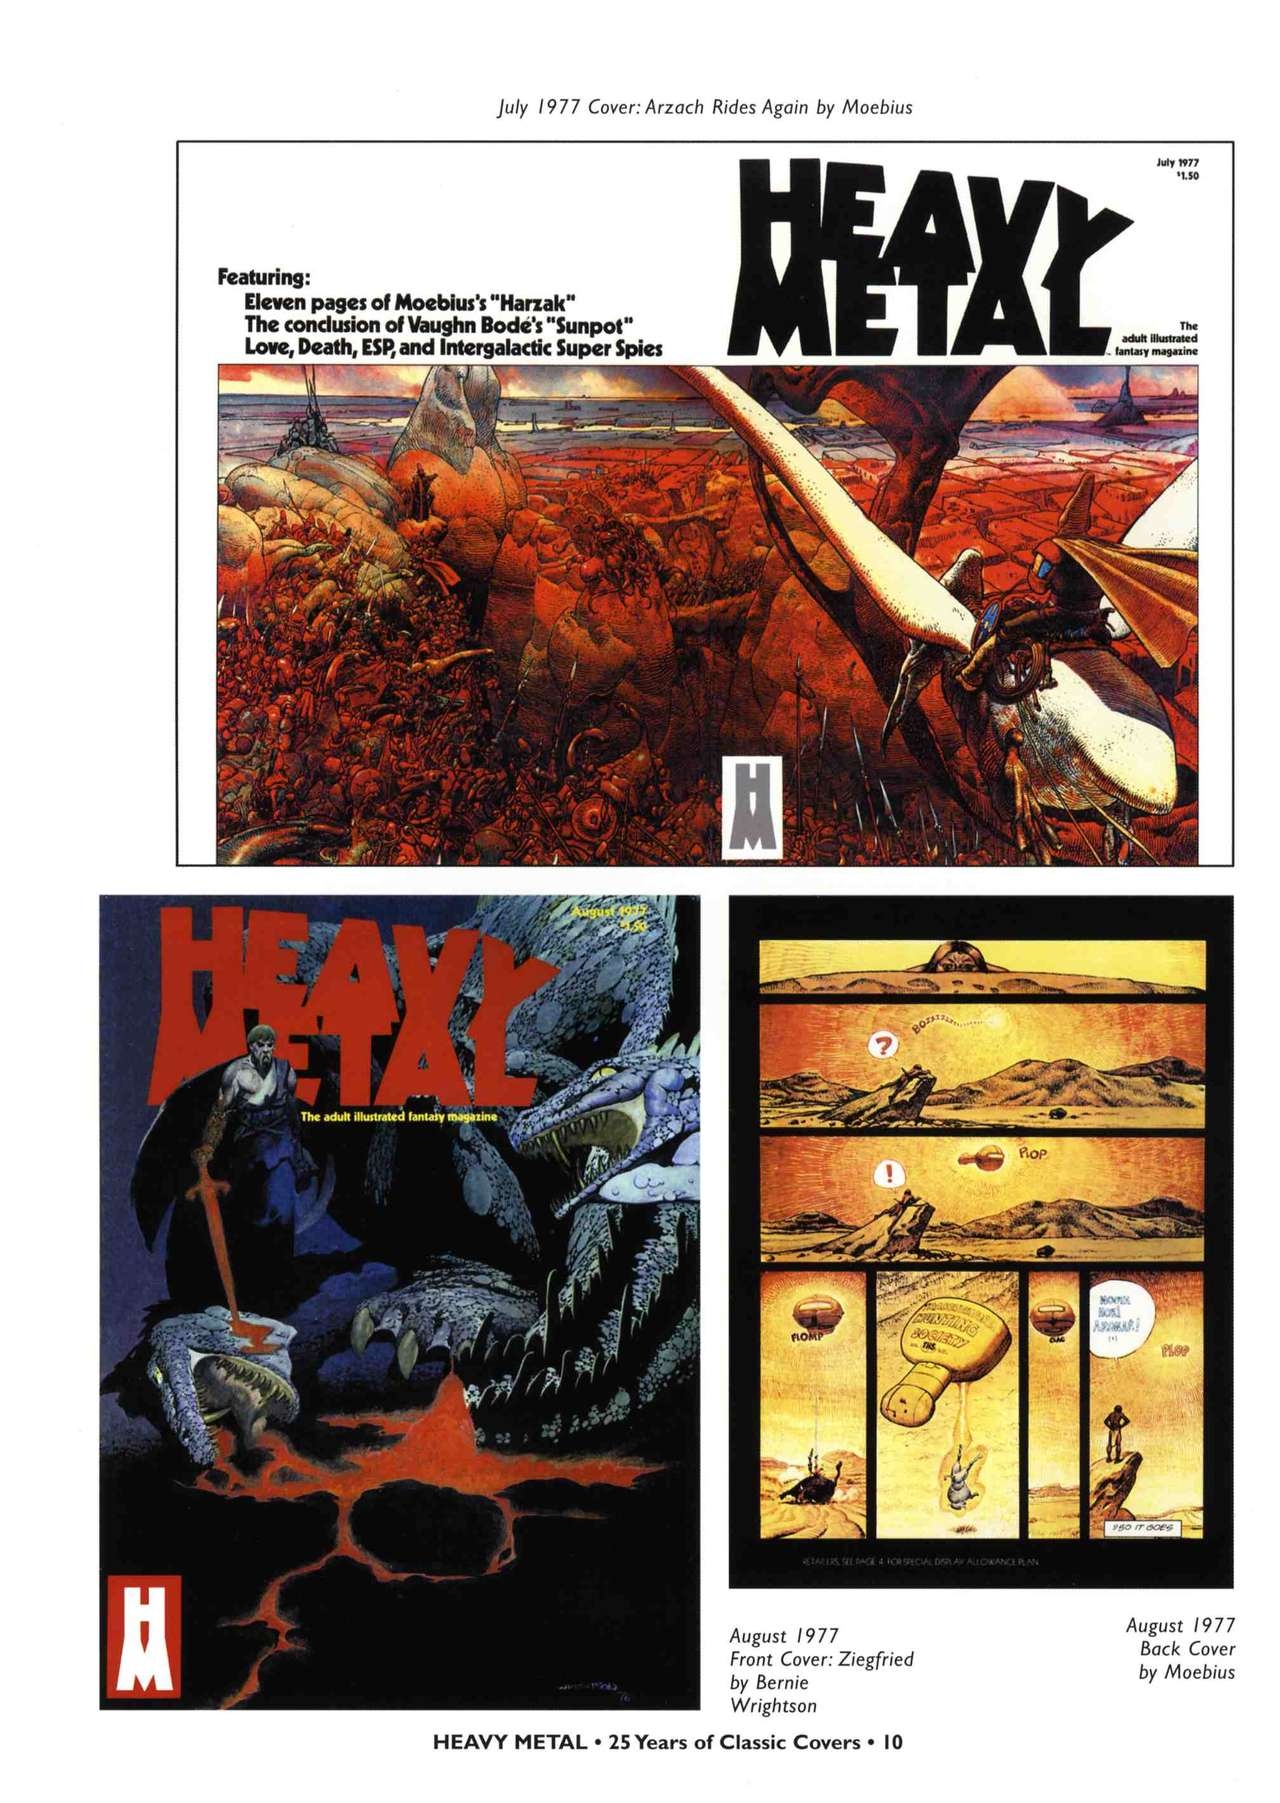 HEAVY METAL 25 Years of Classic Covers 15